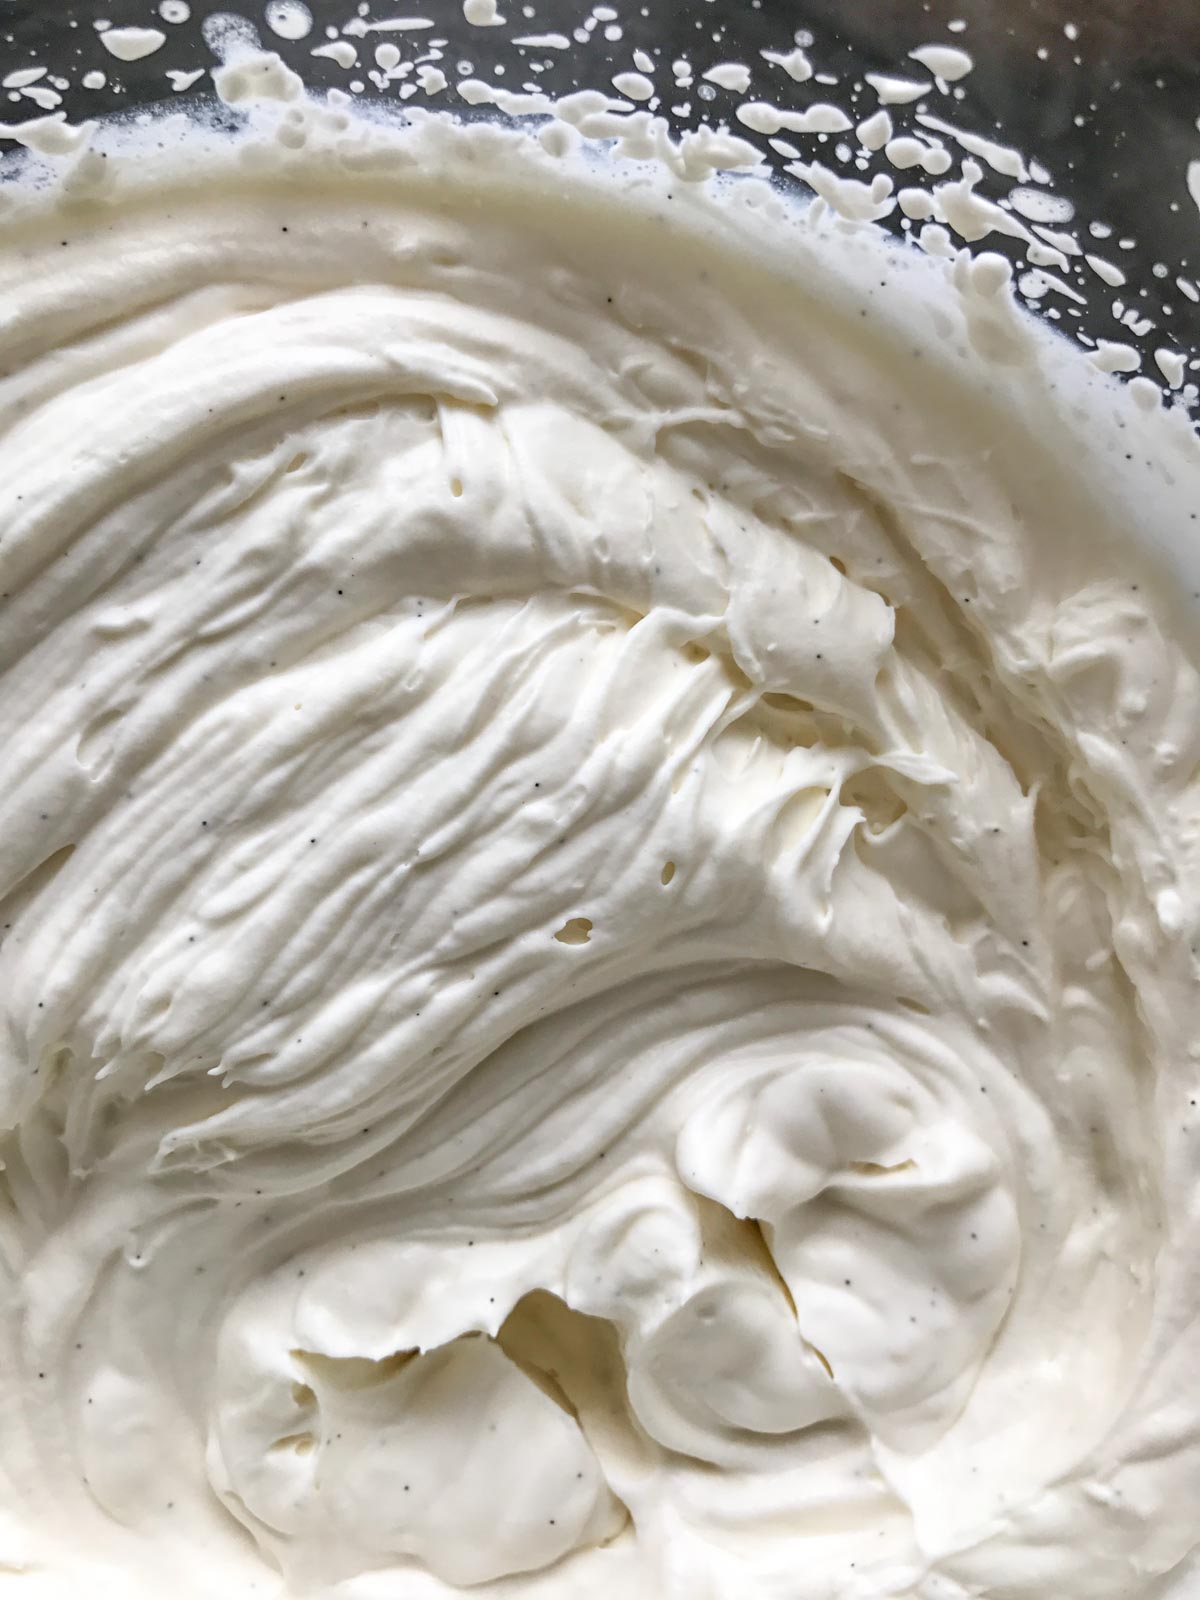 Homemade whipped cream in a bowl.  